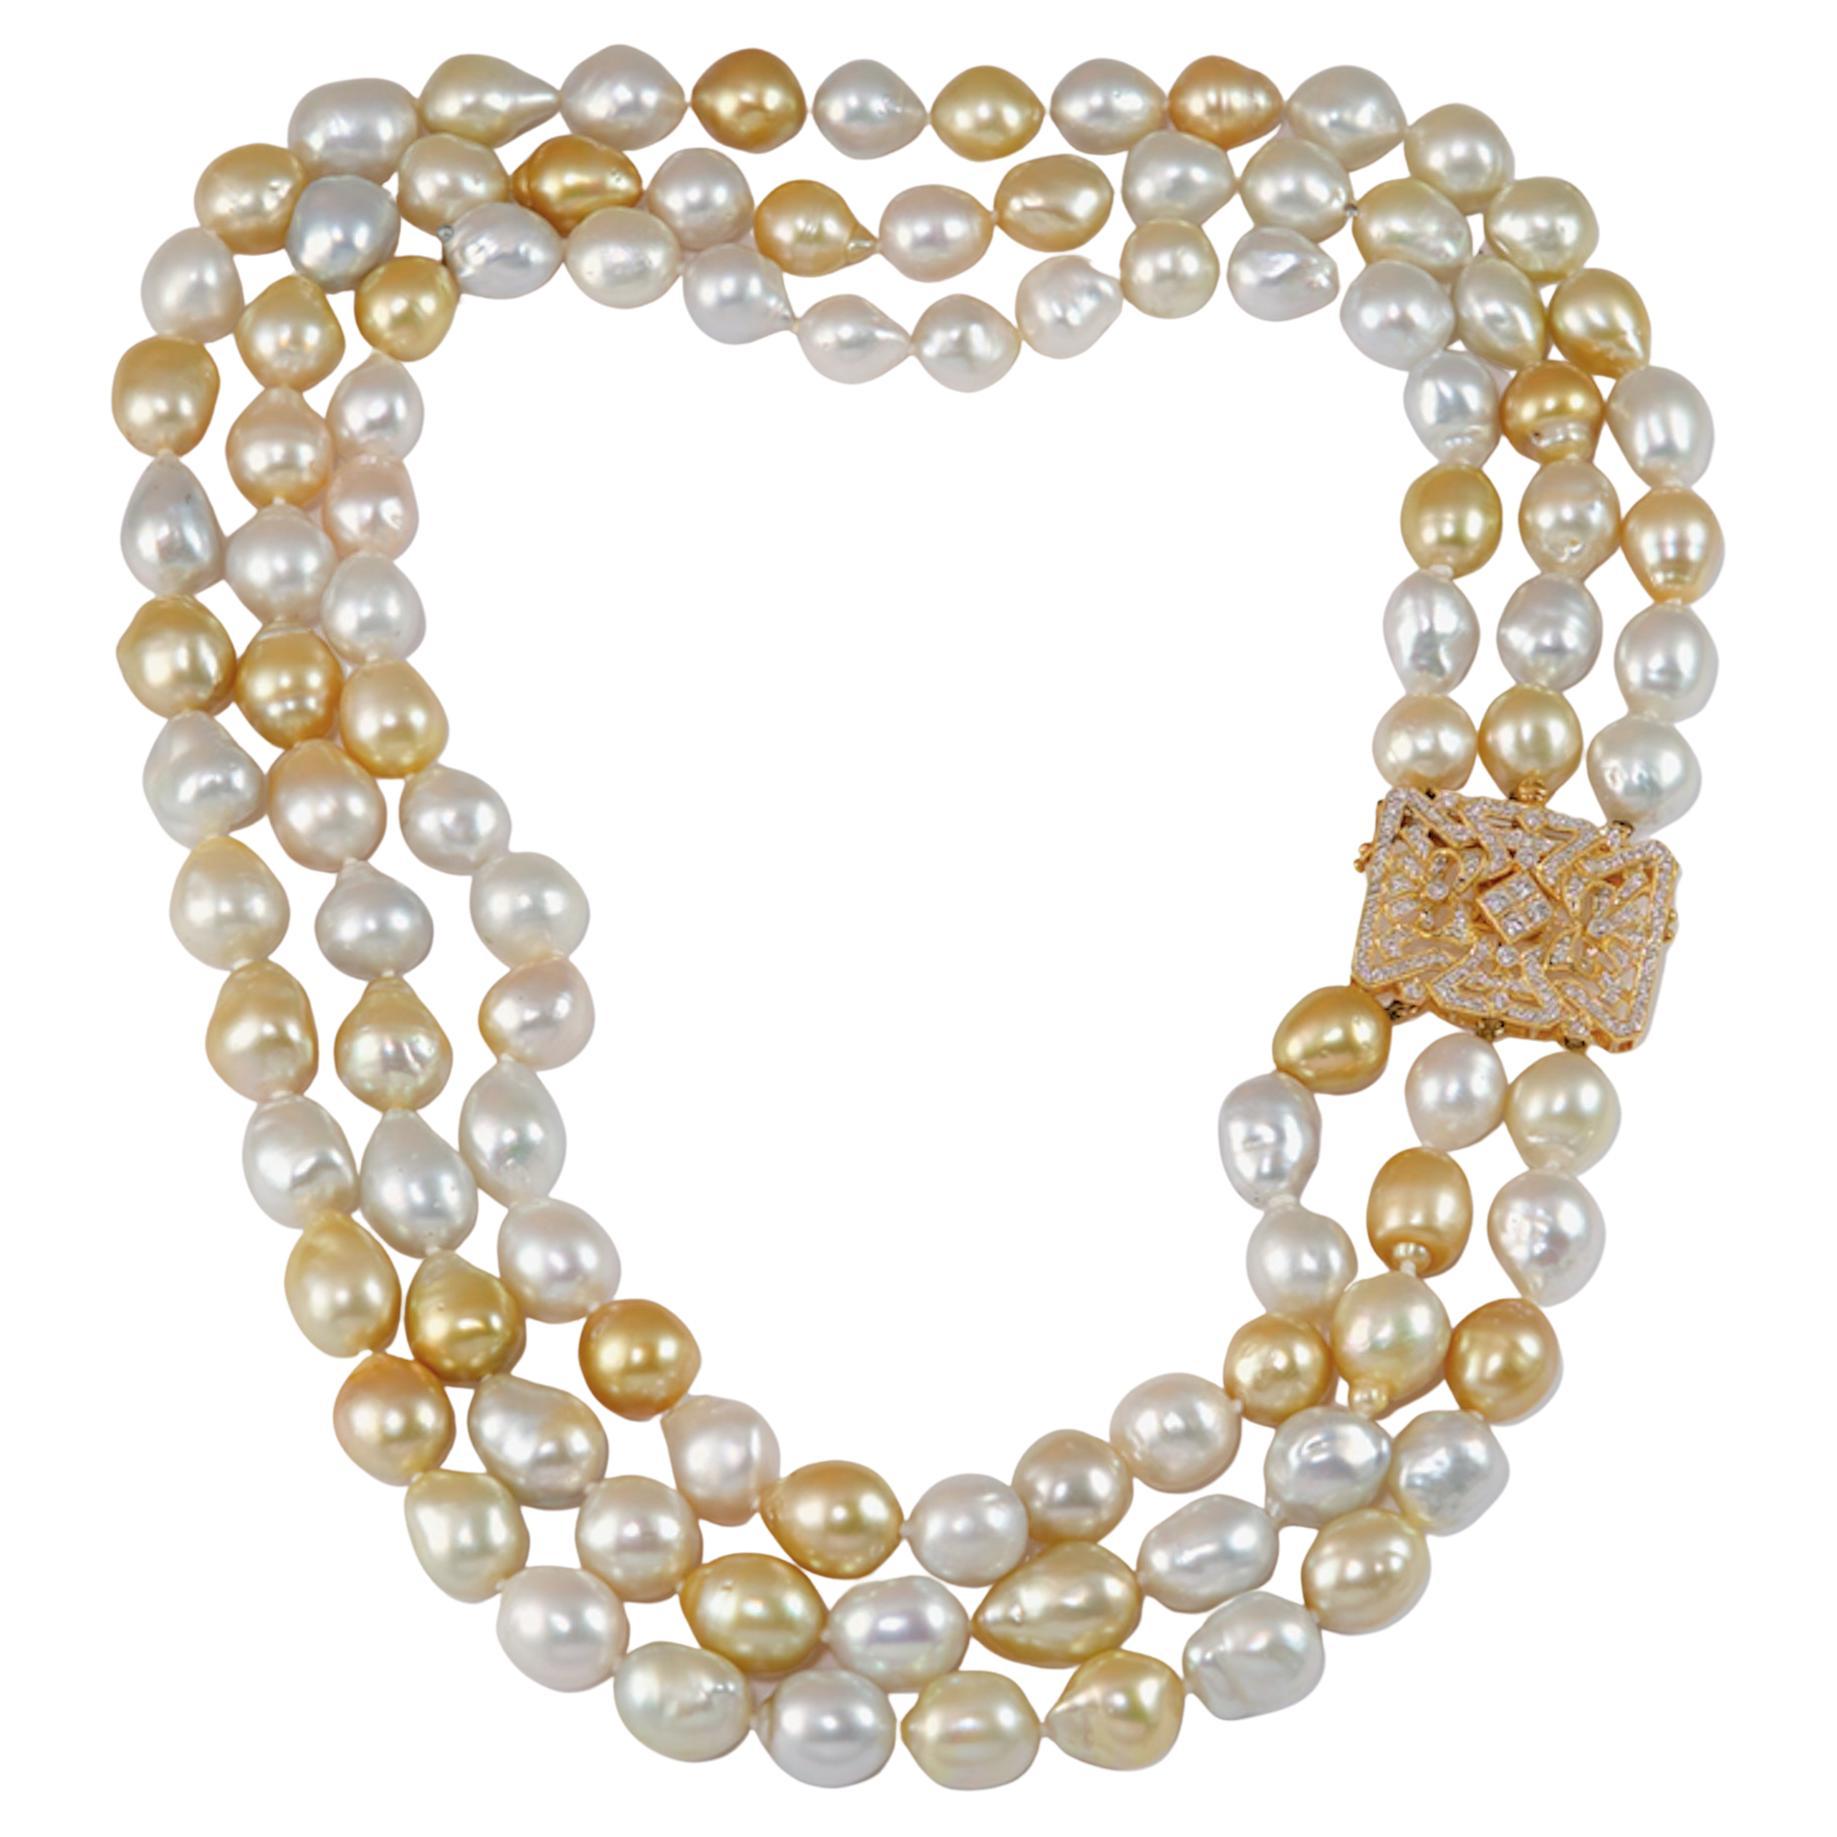 Classical Roman Olympus Art Certified, South Sea Pearl Baroque New Beginnings Necklace For Sale